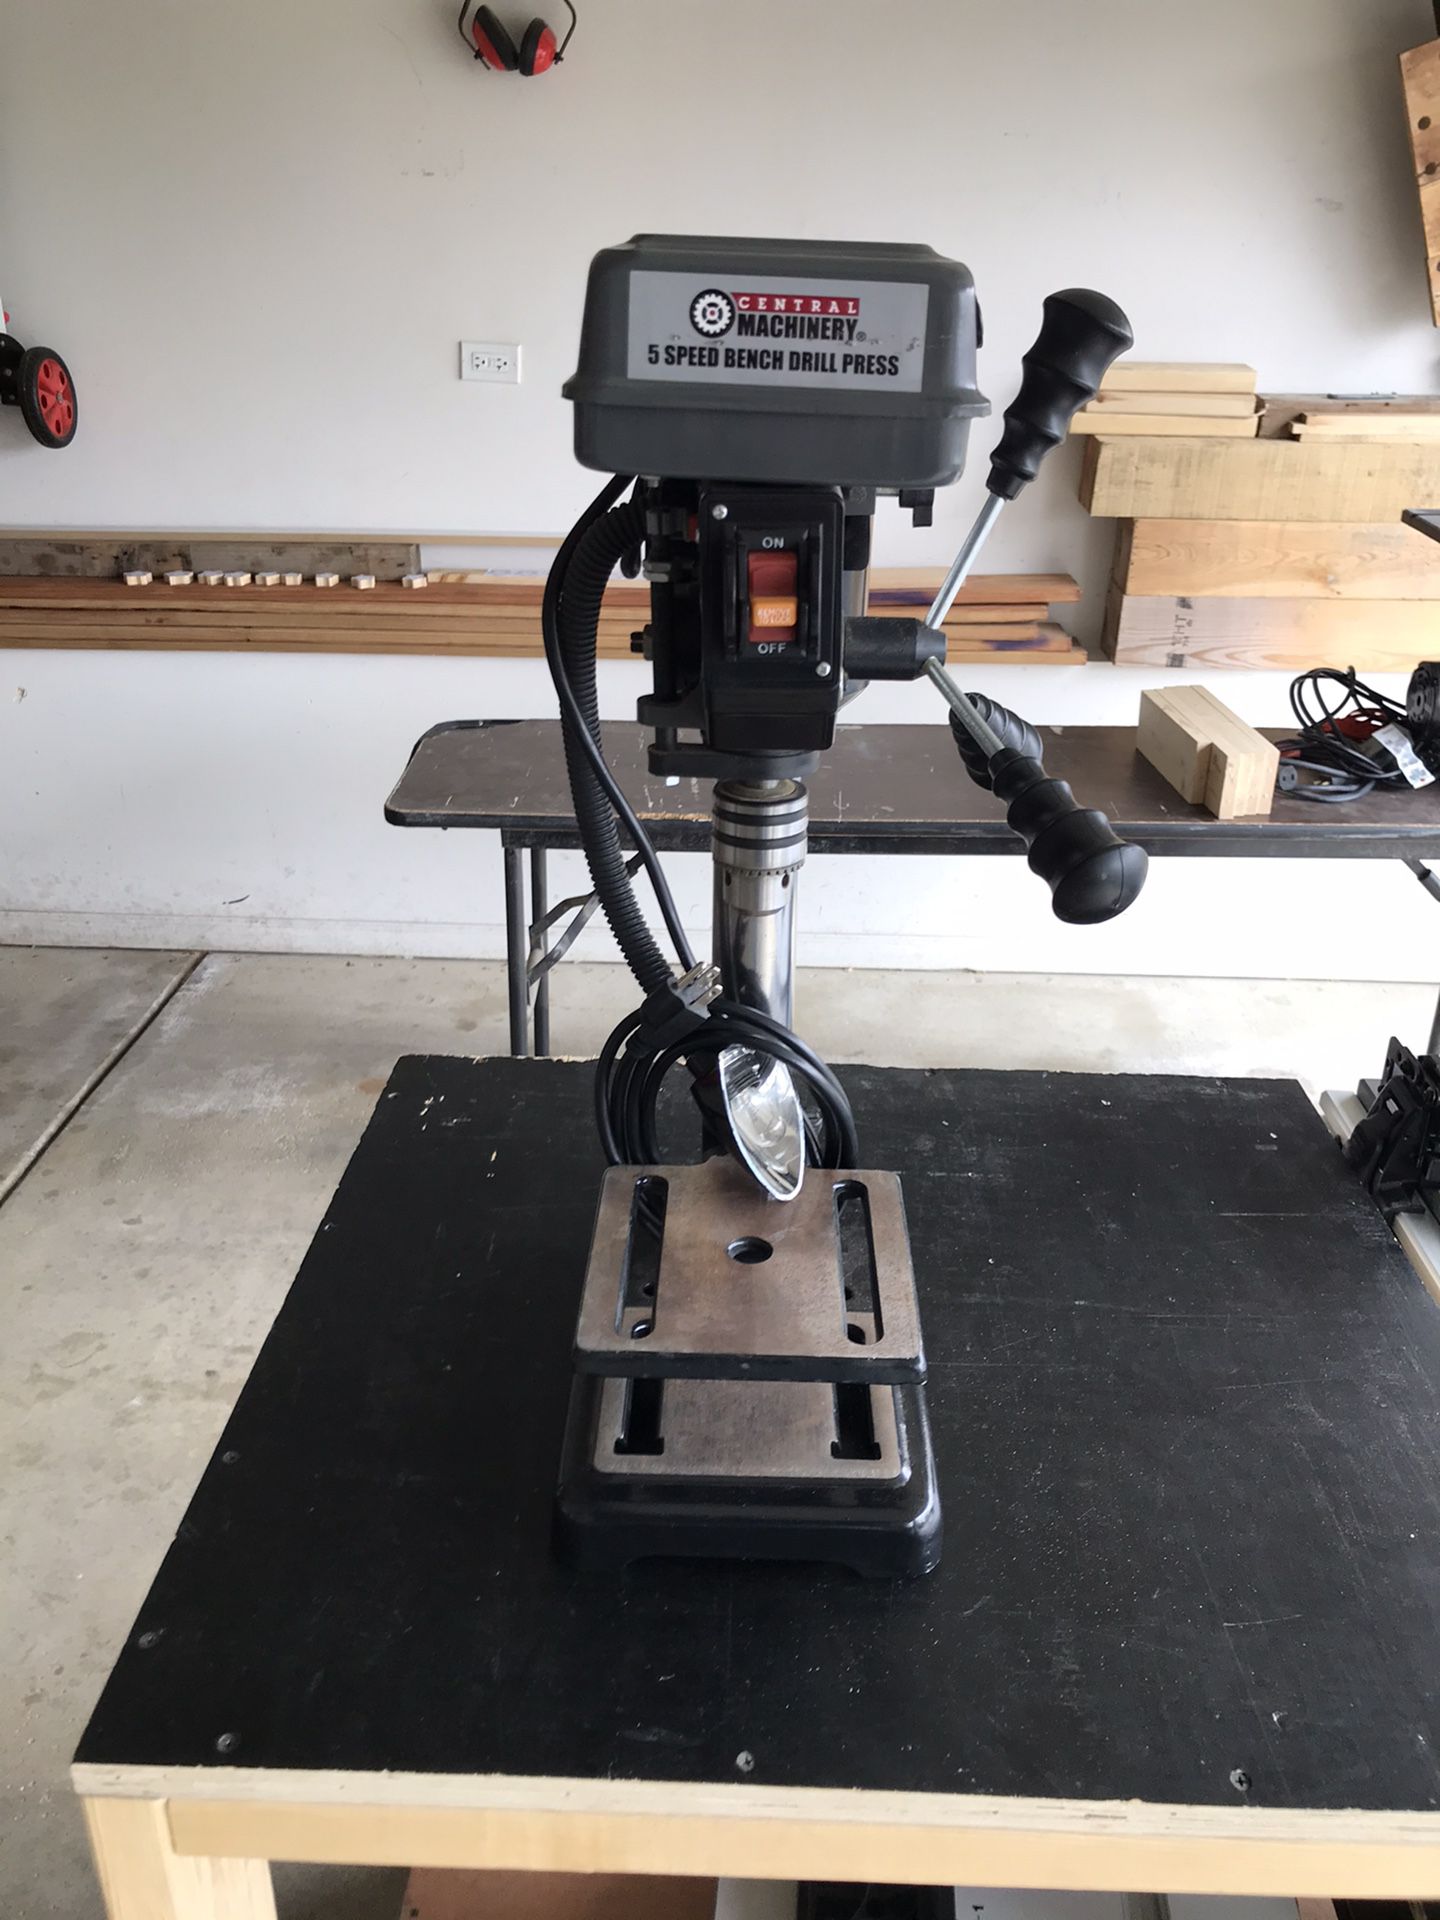 Central Machinery 5 Speed Benchtop Drill Press With Built In Work Light